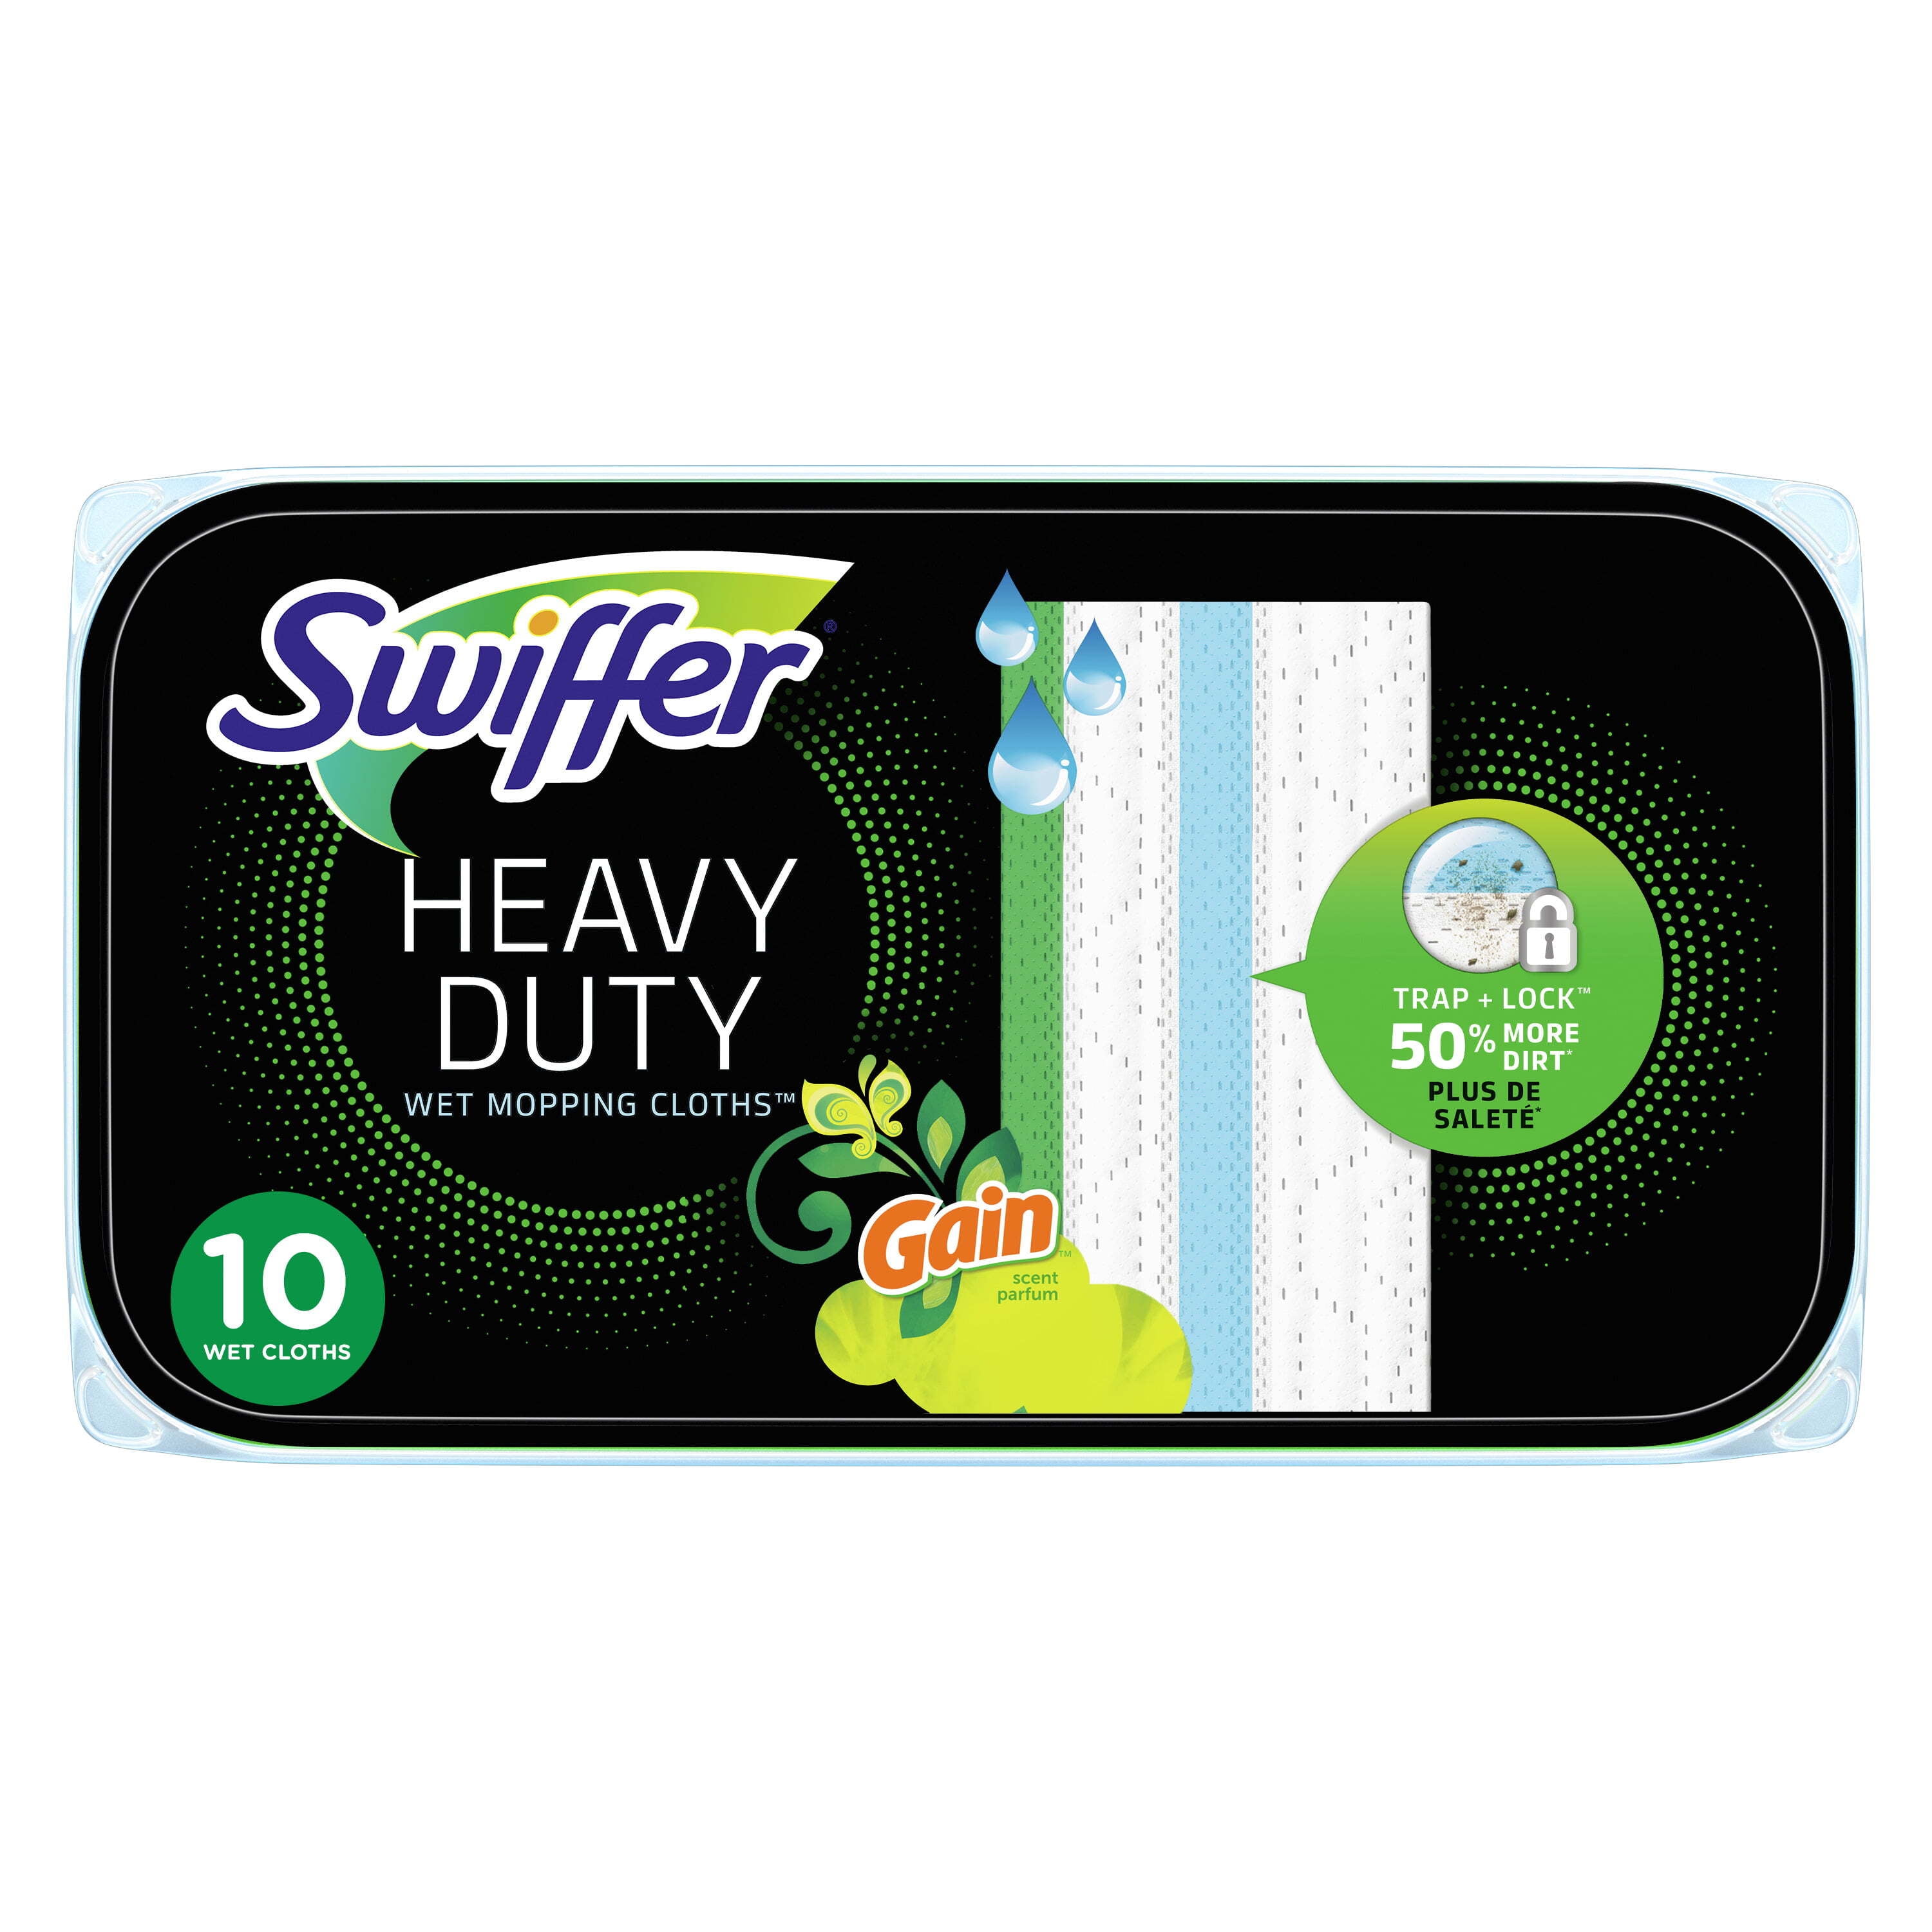 Swiffer Wet Mopping Cloths, Heavy Duty, with Gain Scent - 10 wet cloths